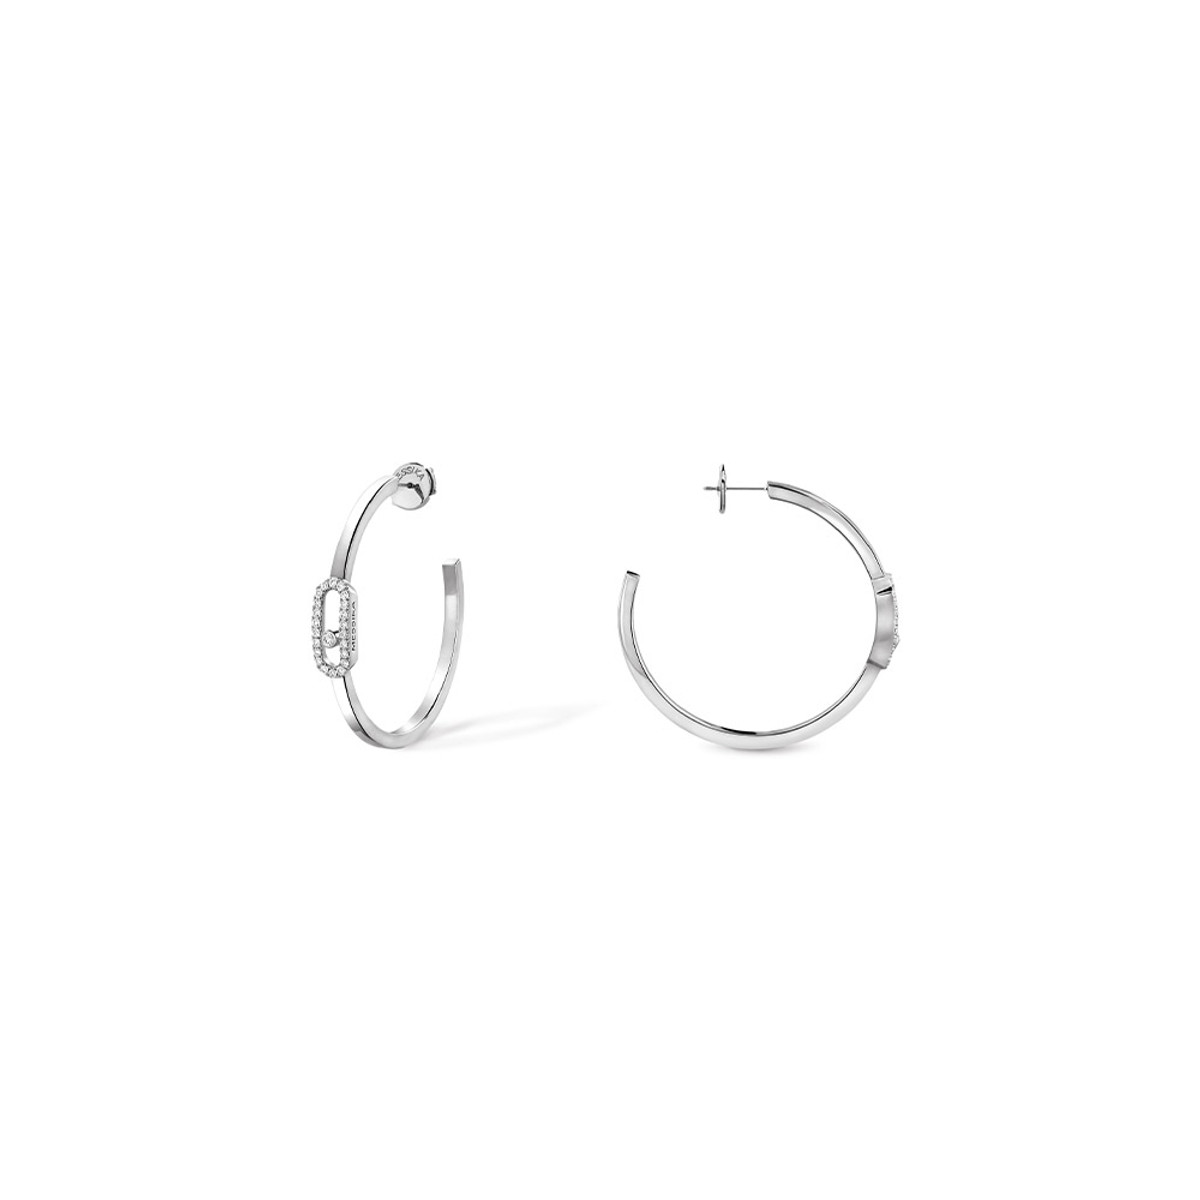 Messika 18K White Gold Creoles Move Uno Diamond Earrings-40109 Product Image